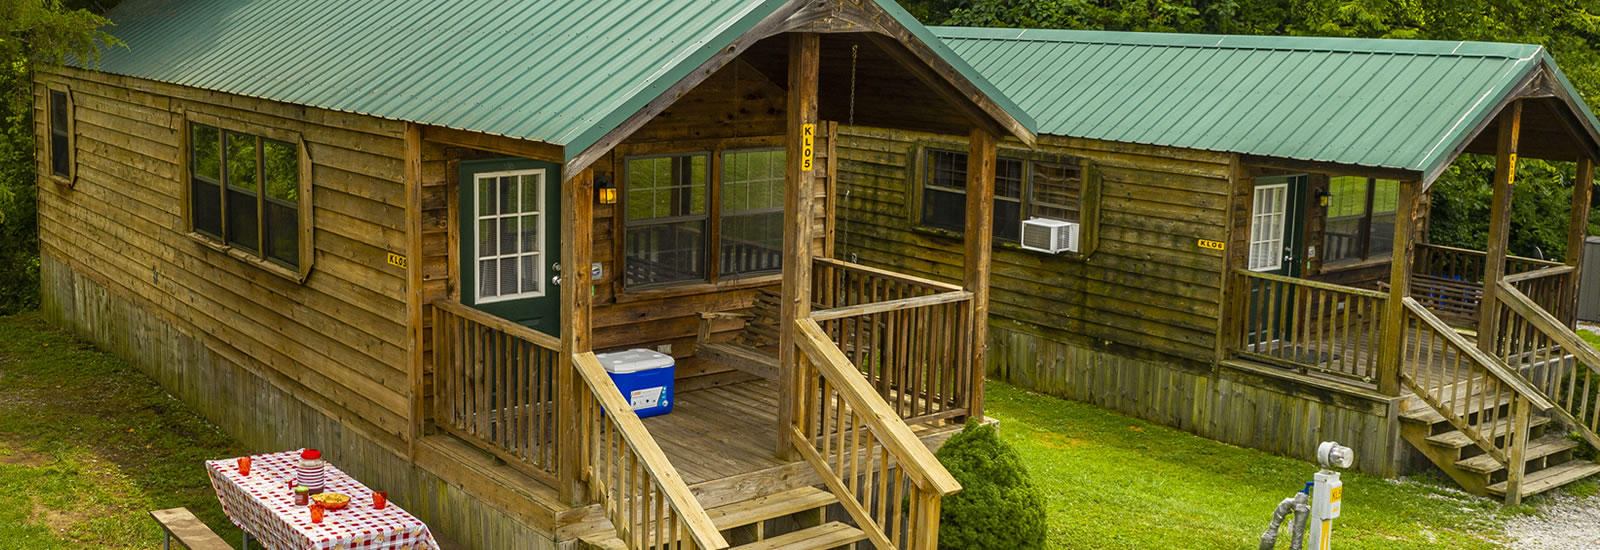 When you choose a KOA campground location you know you'll experience the kind of quality and friendly customer service that only comes with the yellow sign